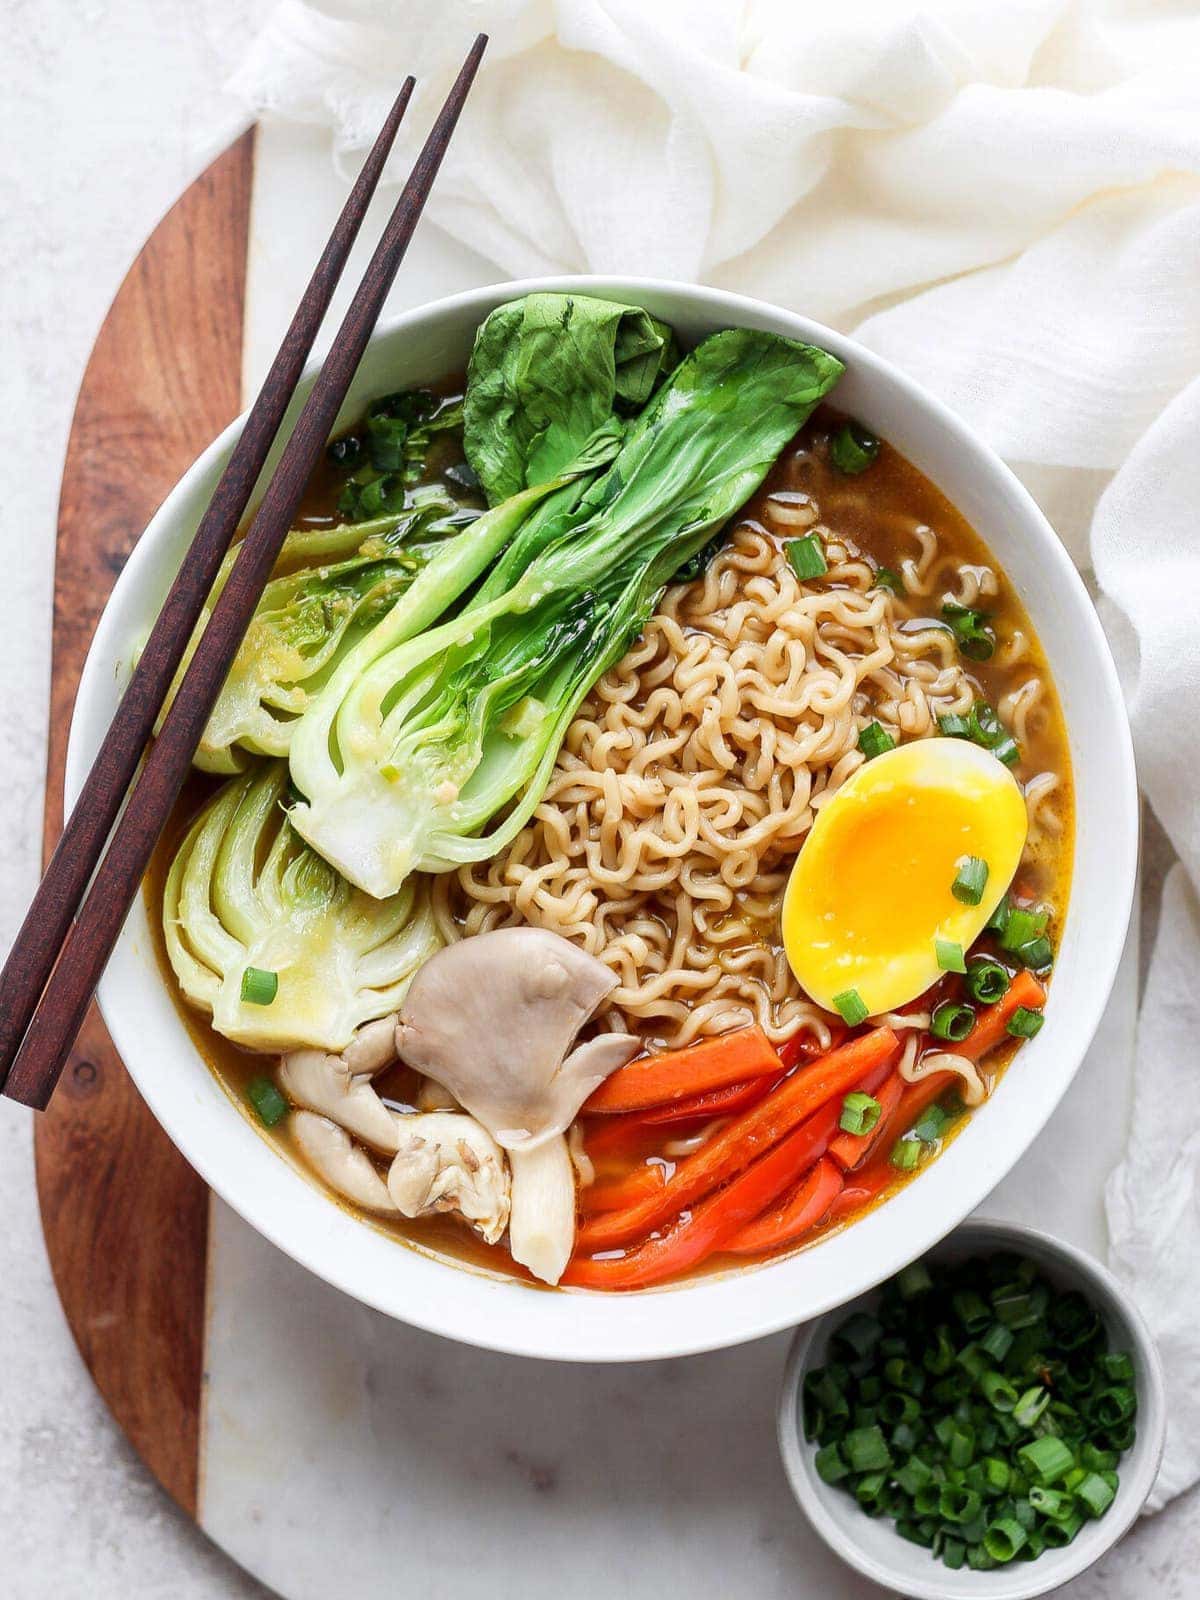 Homemade Ramen - Fit Foodie Finds